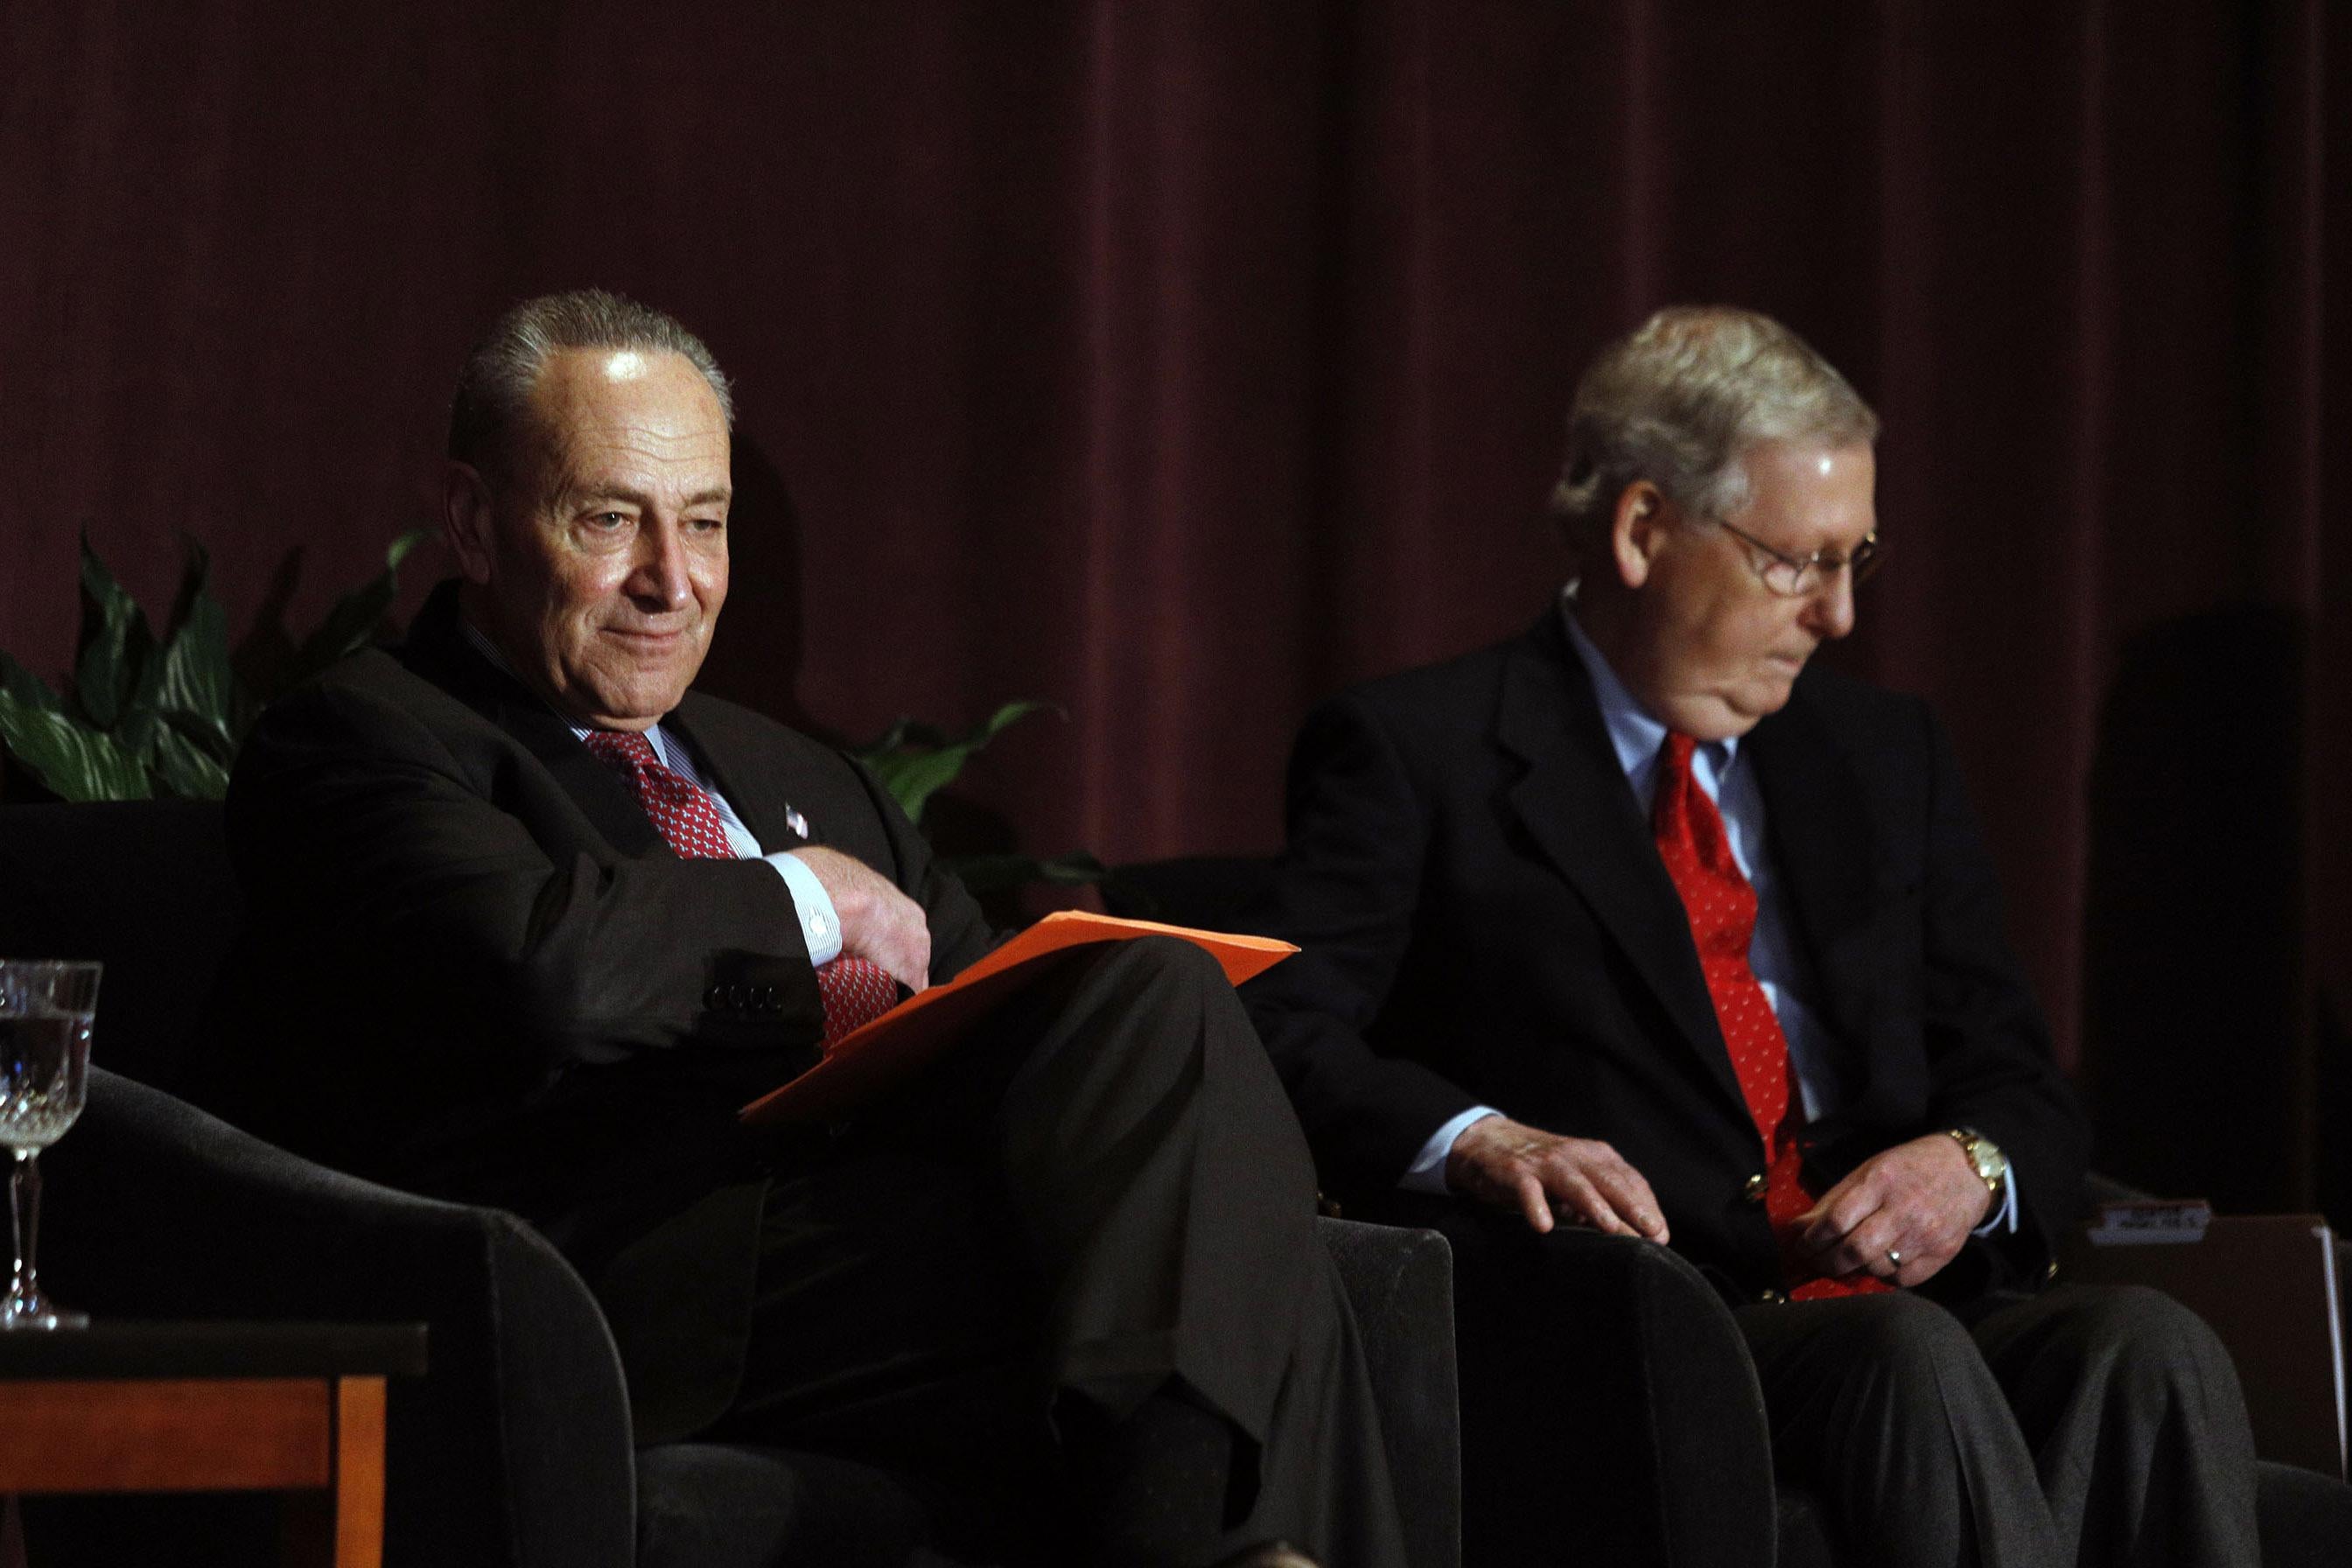 Mitch McConnell and Chuck Schumer sit on a stage in front of plants and a curtain.